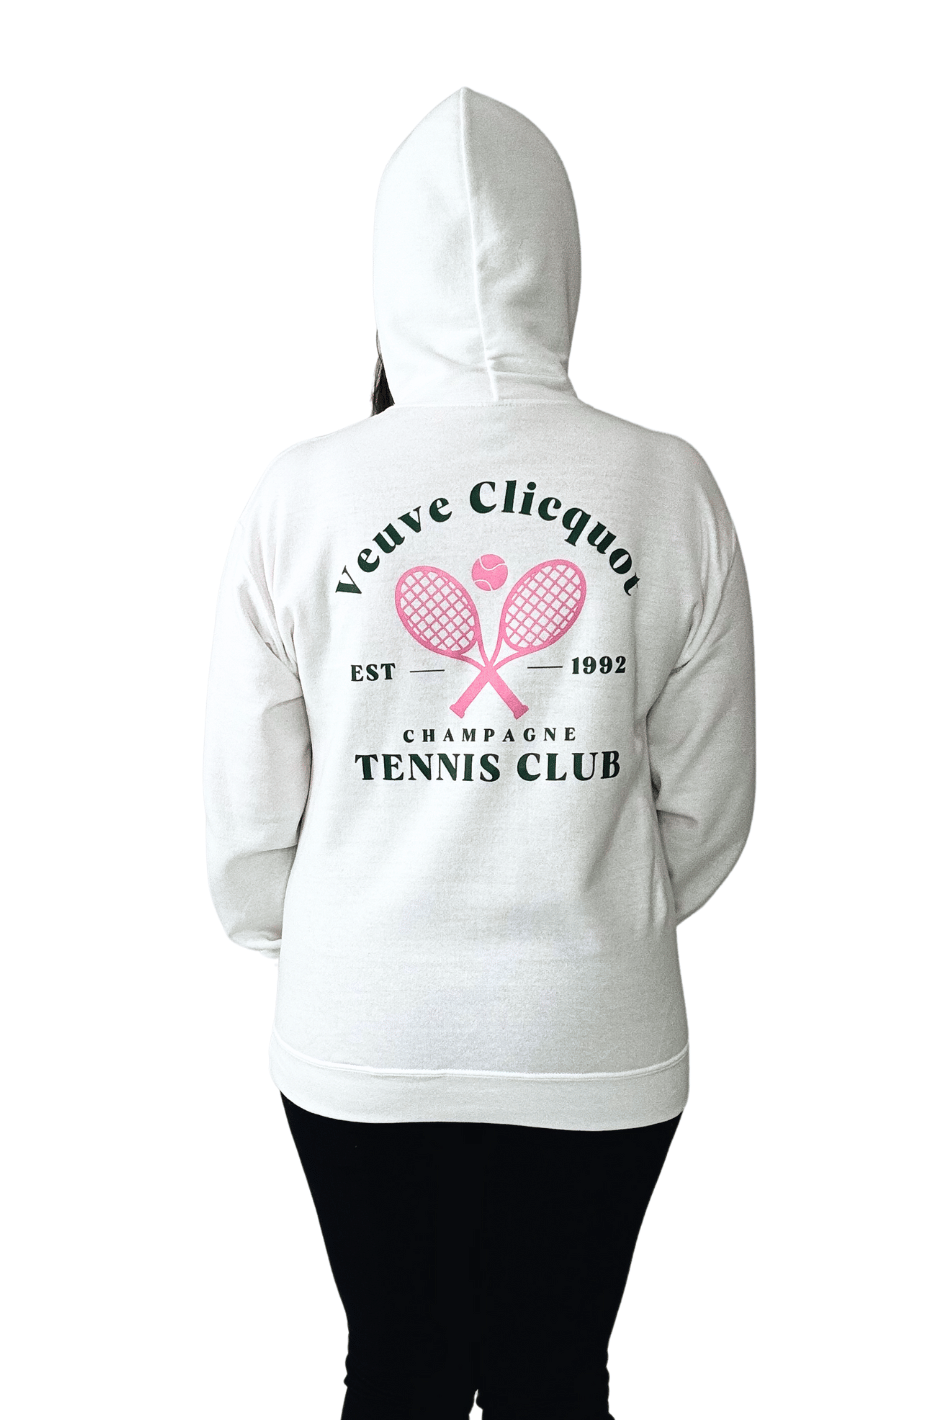 Champagne Tennis Club, Hooded Sweatshirt, Aesthetic Hoodie - Expressive Collective CO.